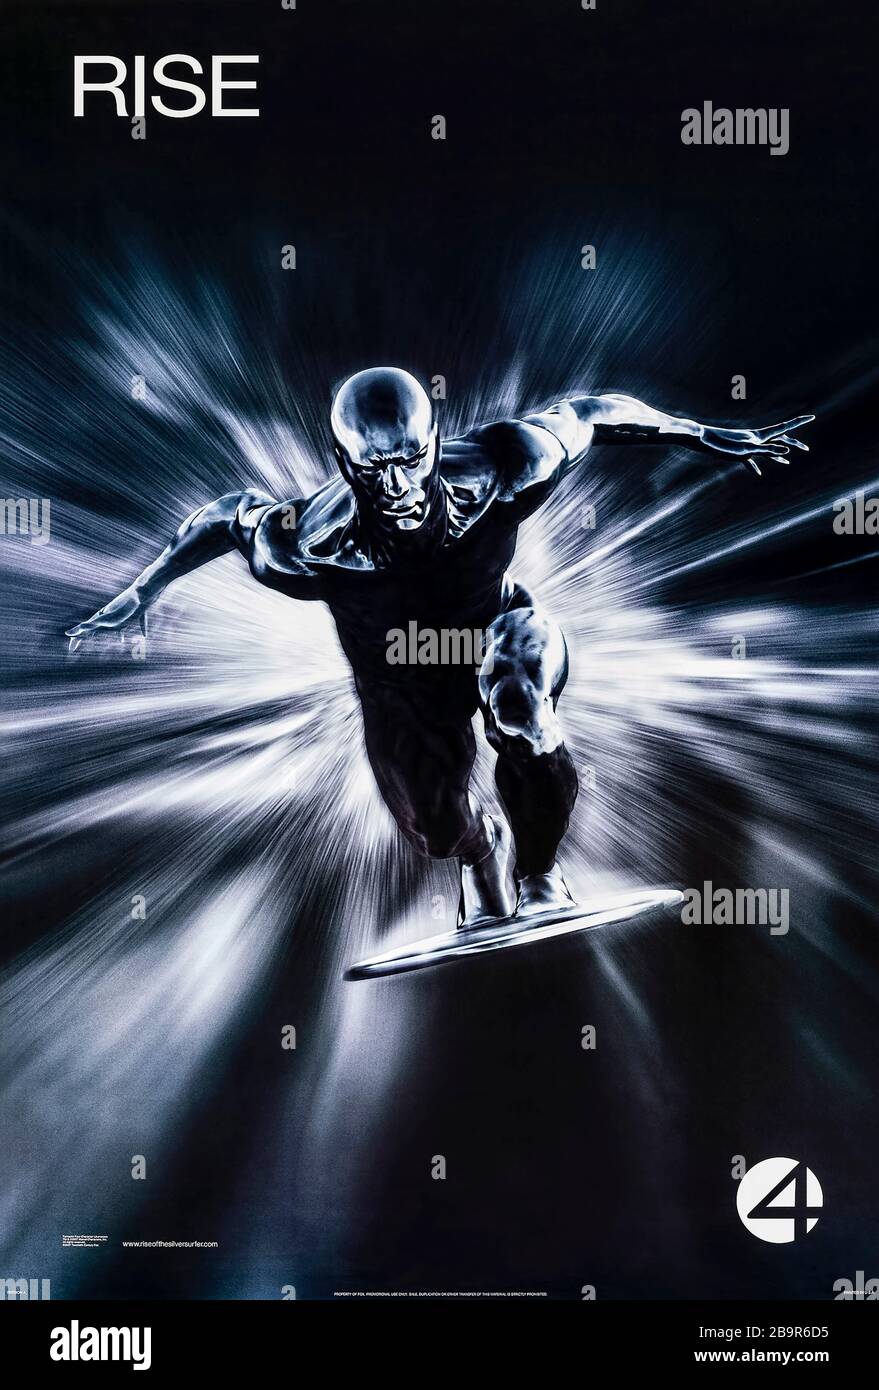 Fantastic 4: Rise of the Silver Surfer (2007) directed by Tim Story and starring Ioan Gruffudd, Michael Chiklis, Chris Evans, Julian McMahon and Jessica Alba. The powerful Silver Surfer helps the Fantastic Four against the cosmic entity Galactus that consumes whole planets. Stock Photo